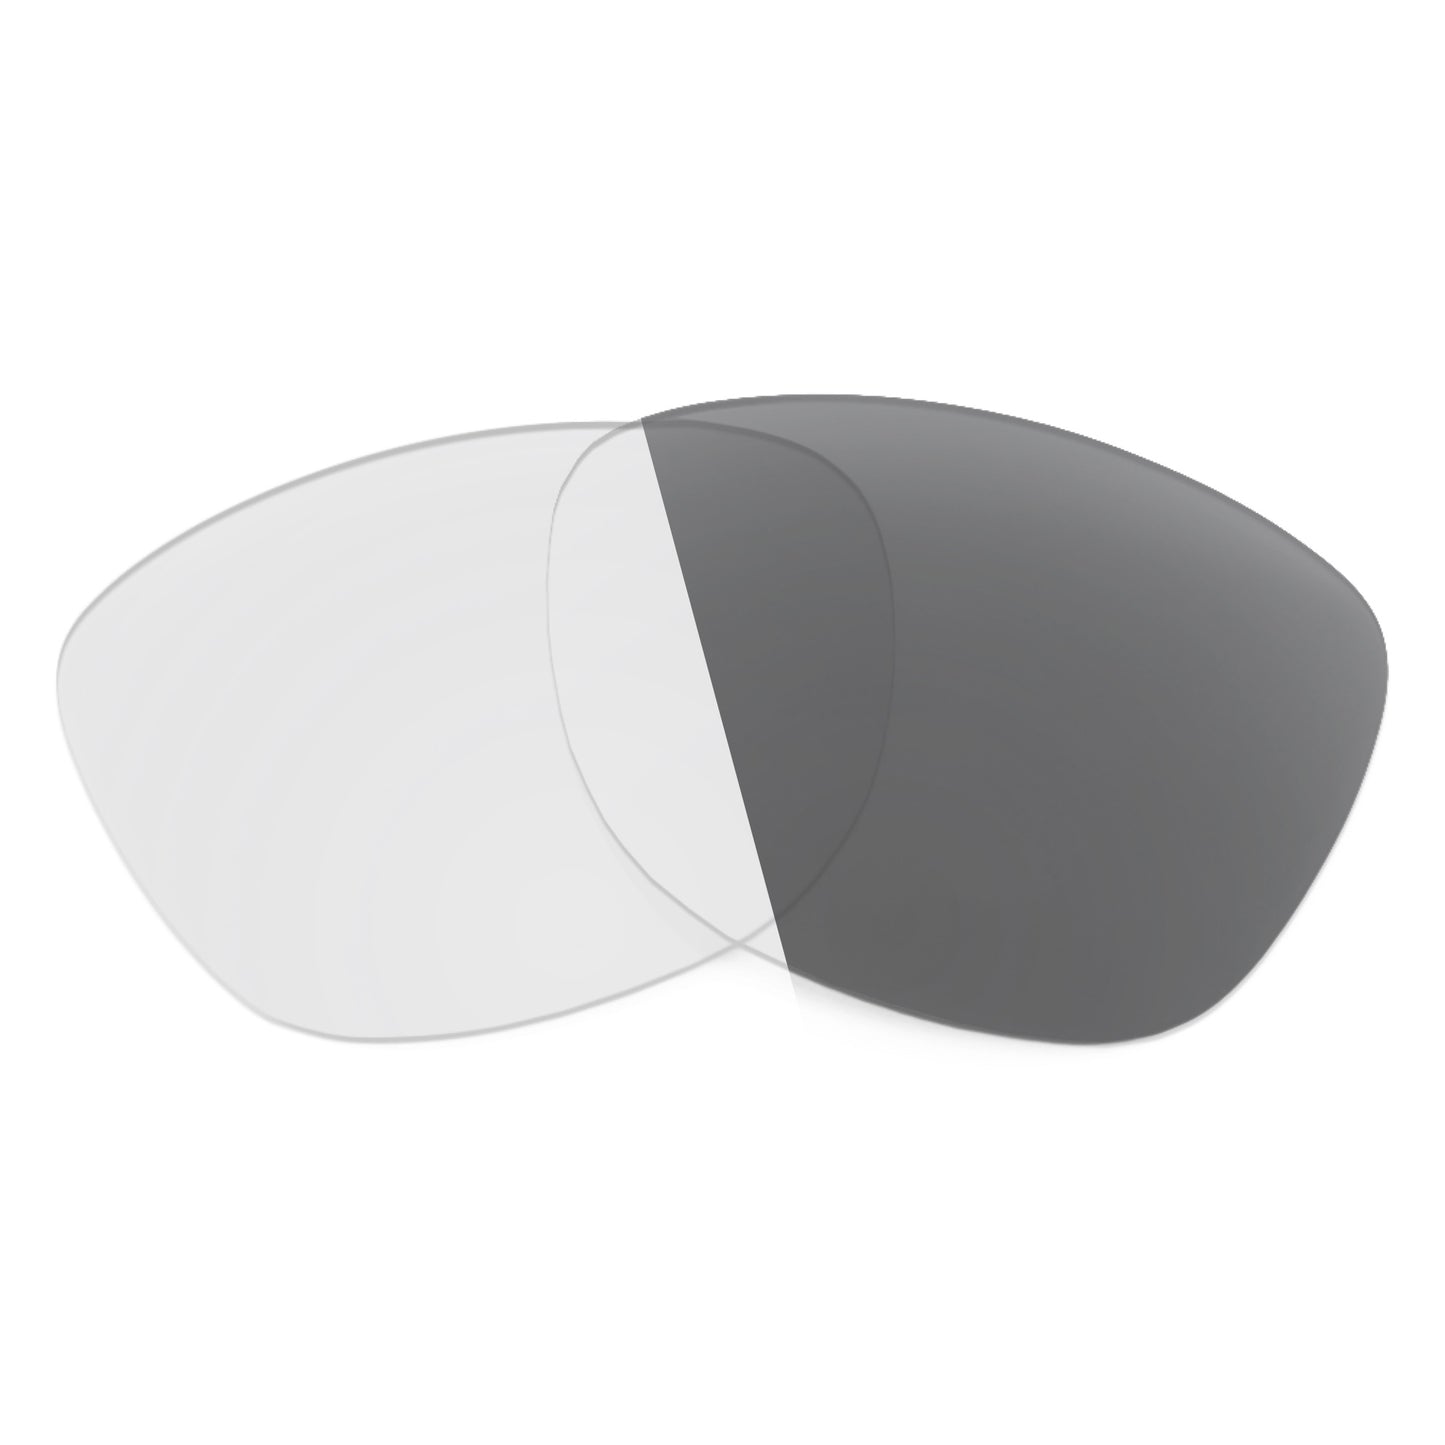 Revant replacement lenses for Ray-Ban RB3502 61mm Non-Polarized Adapt Gray Photochromic